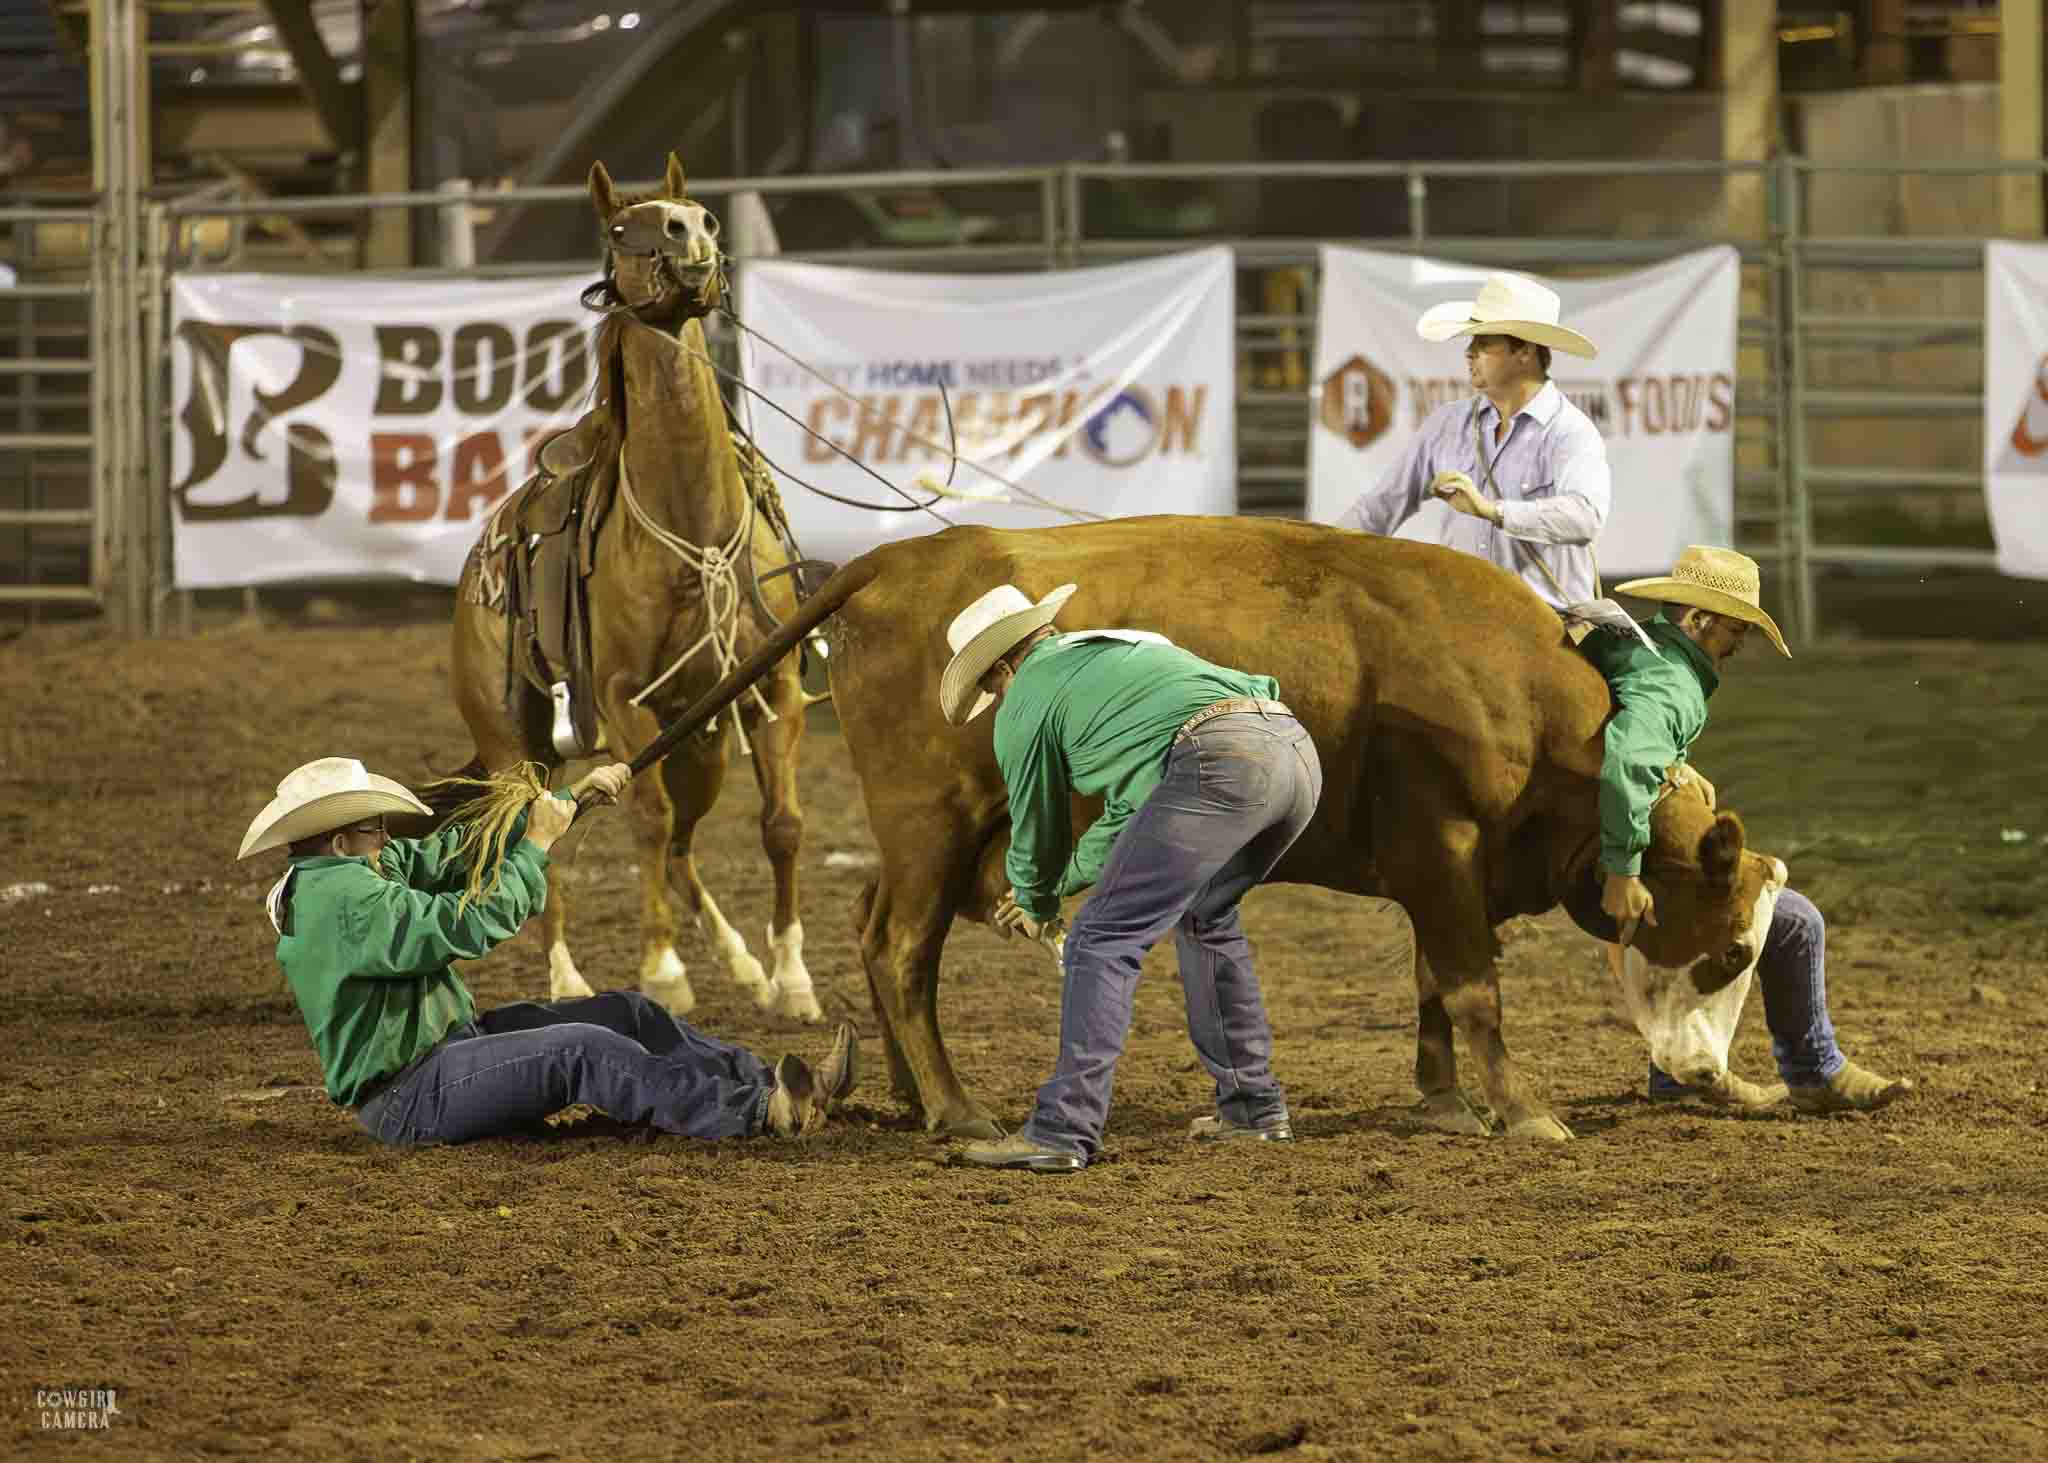 Ranch Rodeo Finals, milking a cow